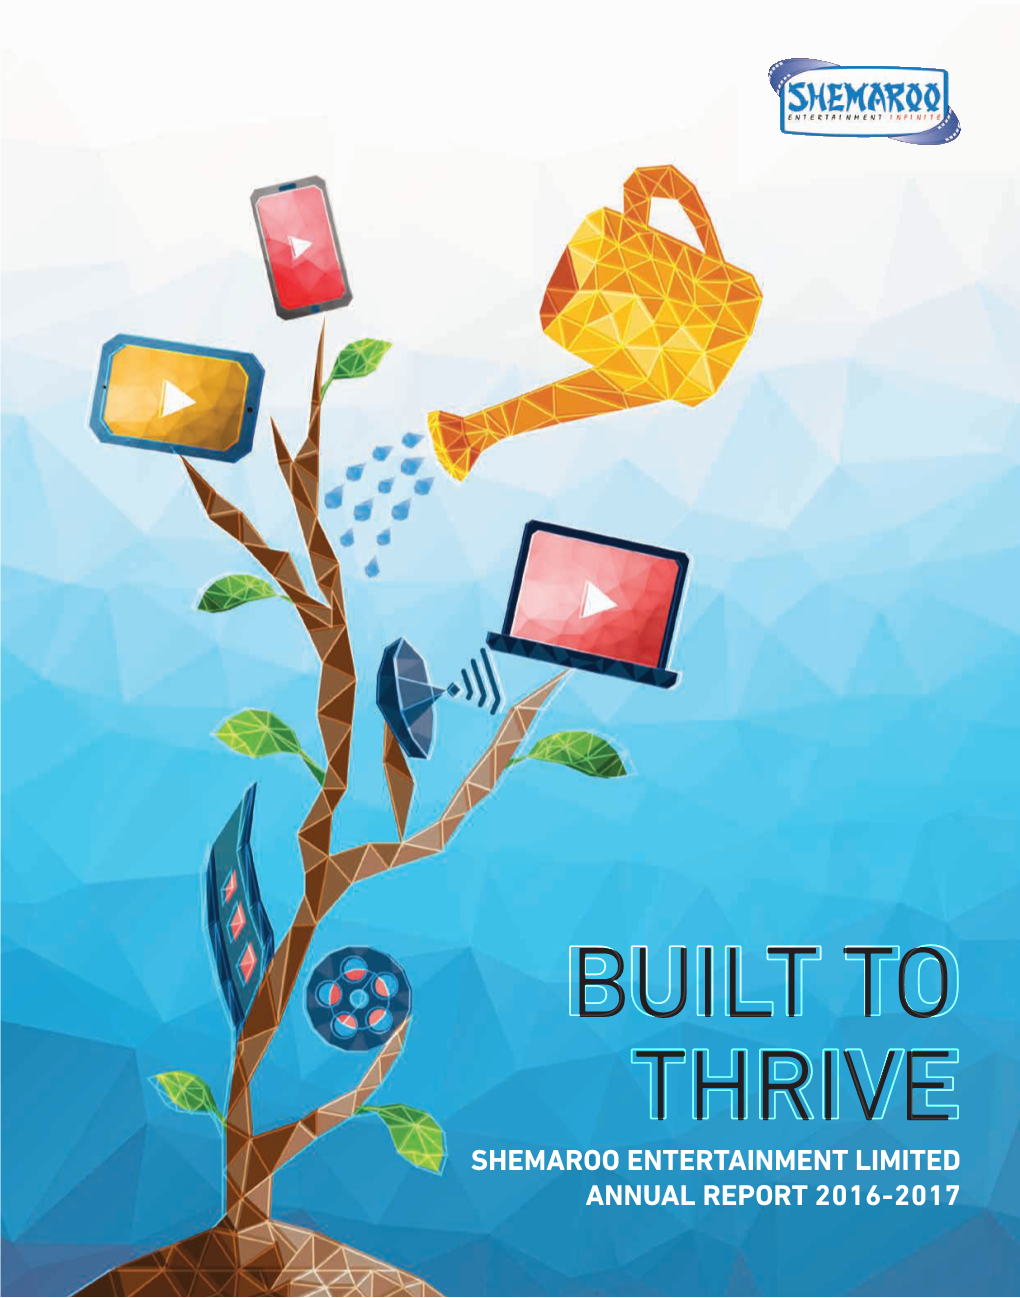 Built to Thrive Shemaroo Entertainment Limited Annual Report 2016-2017 Table of Contents